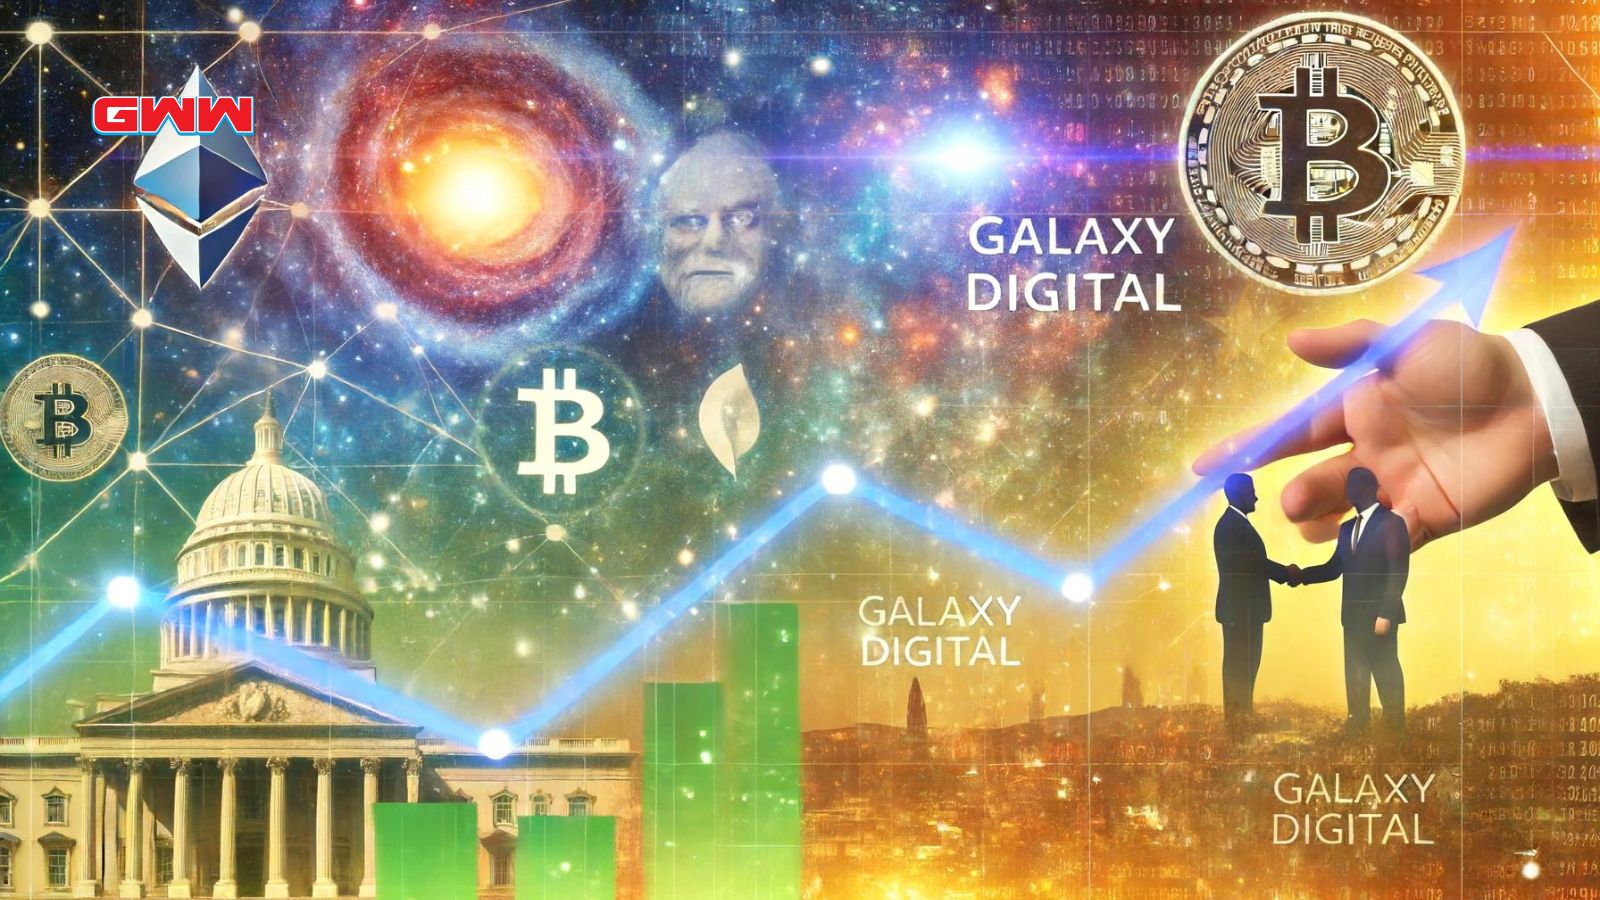 Bitcoin and Galaxy Digital logos with stock market growth and galaxy background